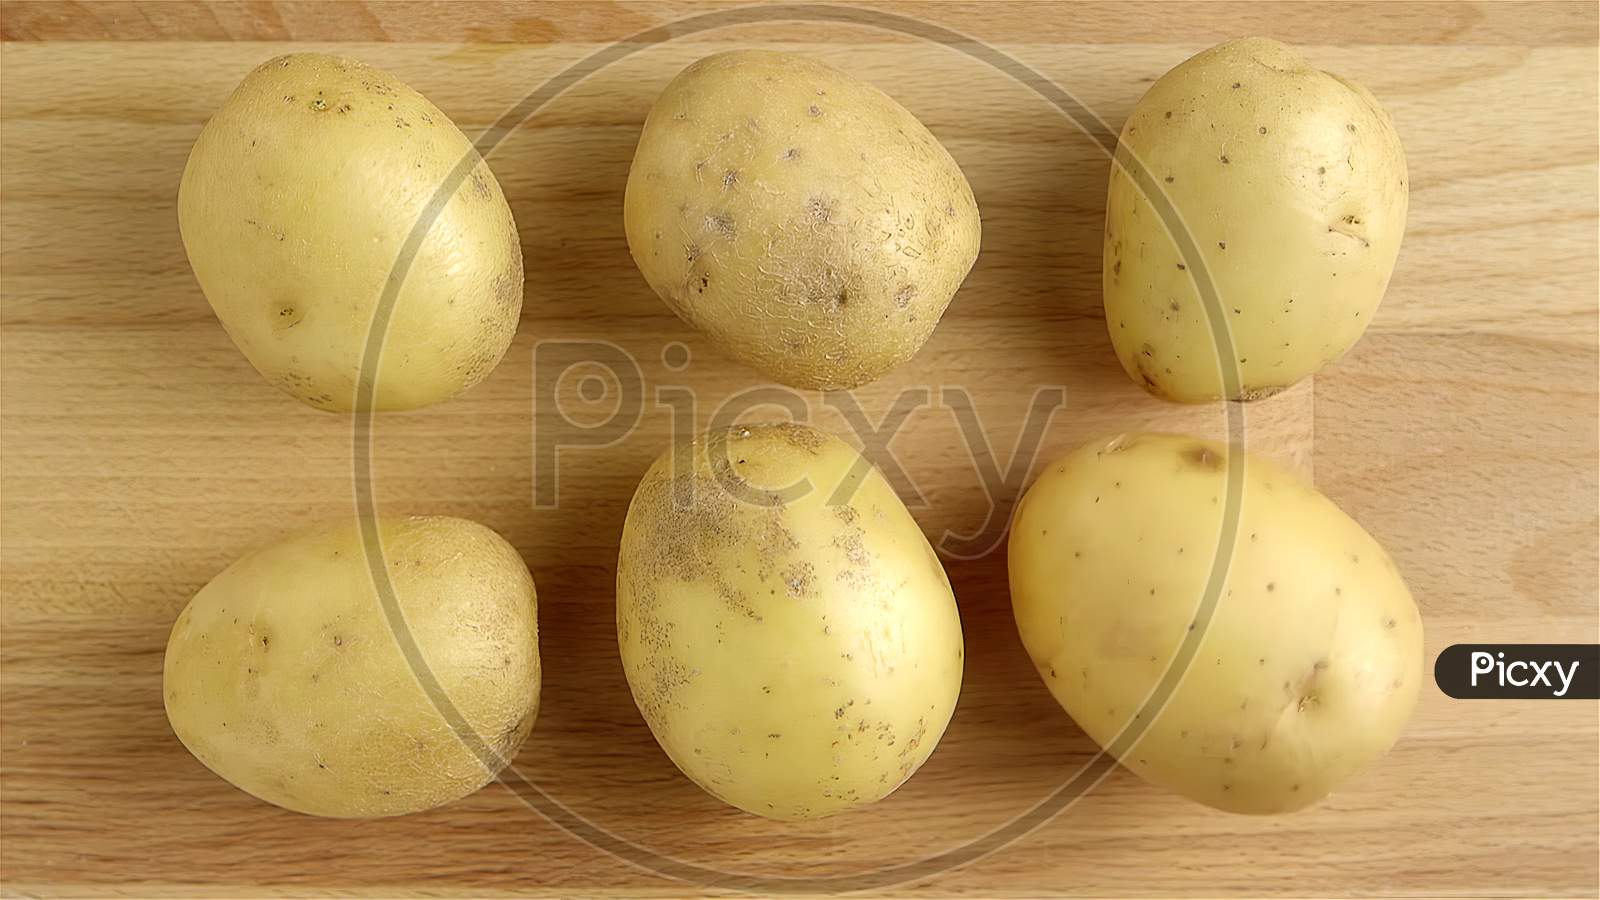 A pile of uncooked white potatoes on a distressed wooden background. Top view